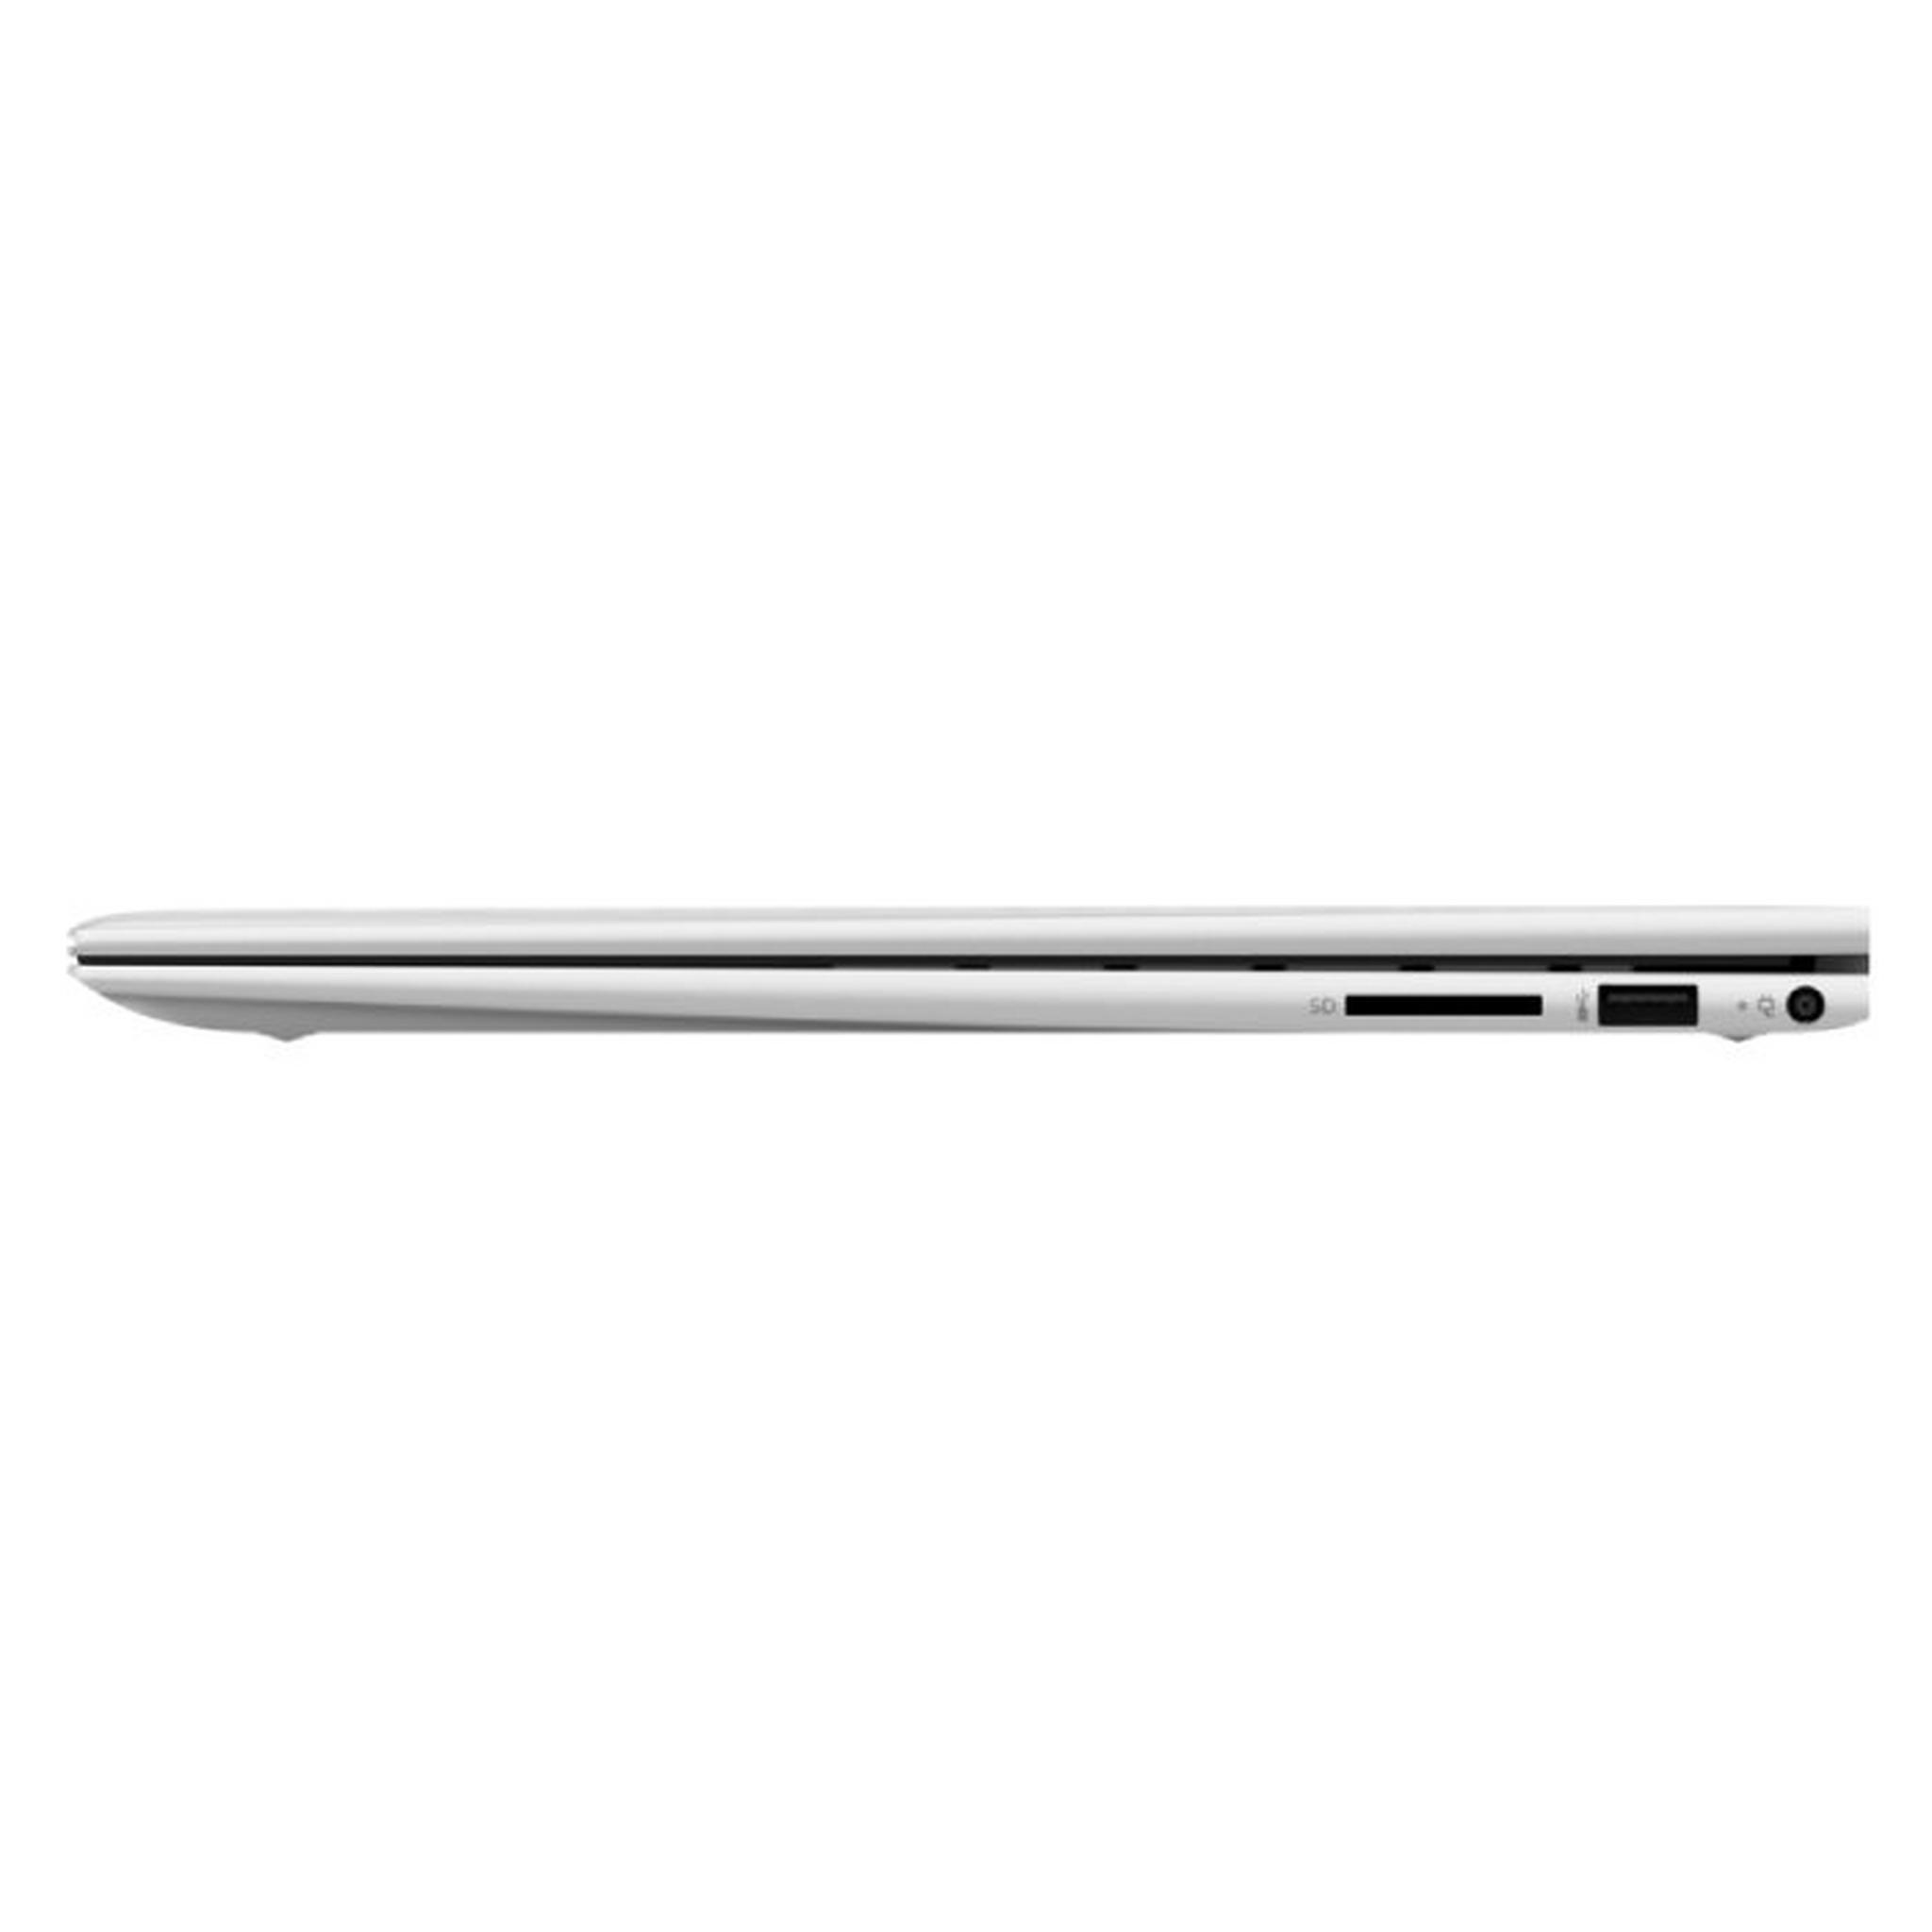 HP Envy x360 Intel Core i5, 8GB RAM, 512GB SSD, 15.6-inch Touch Convertible Laptop - Silver